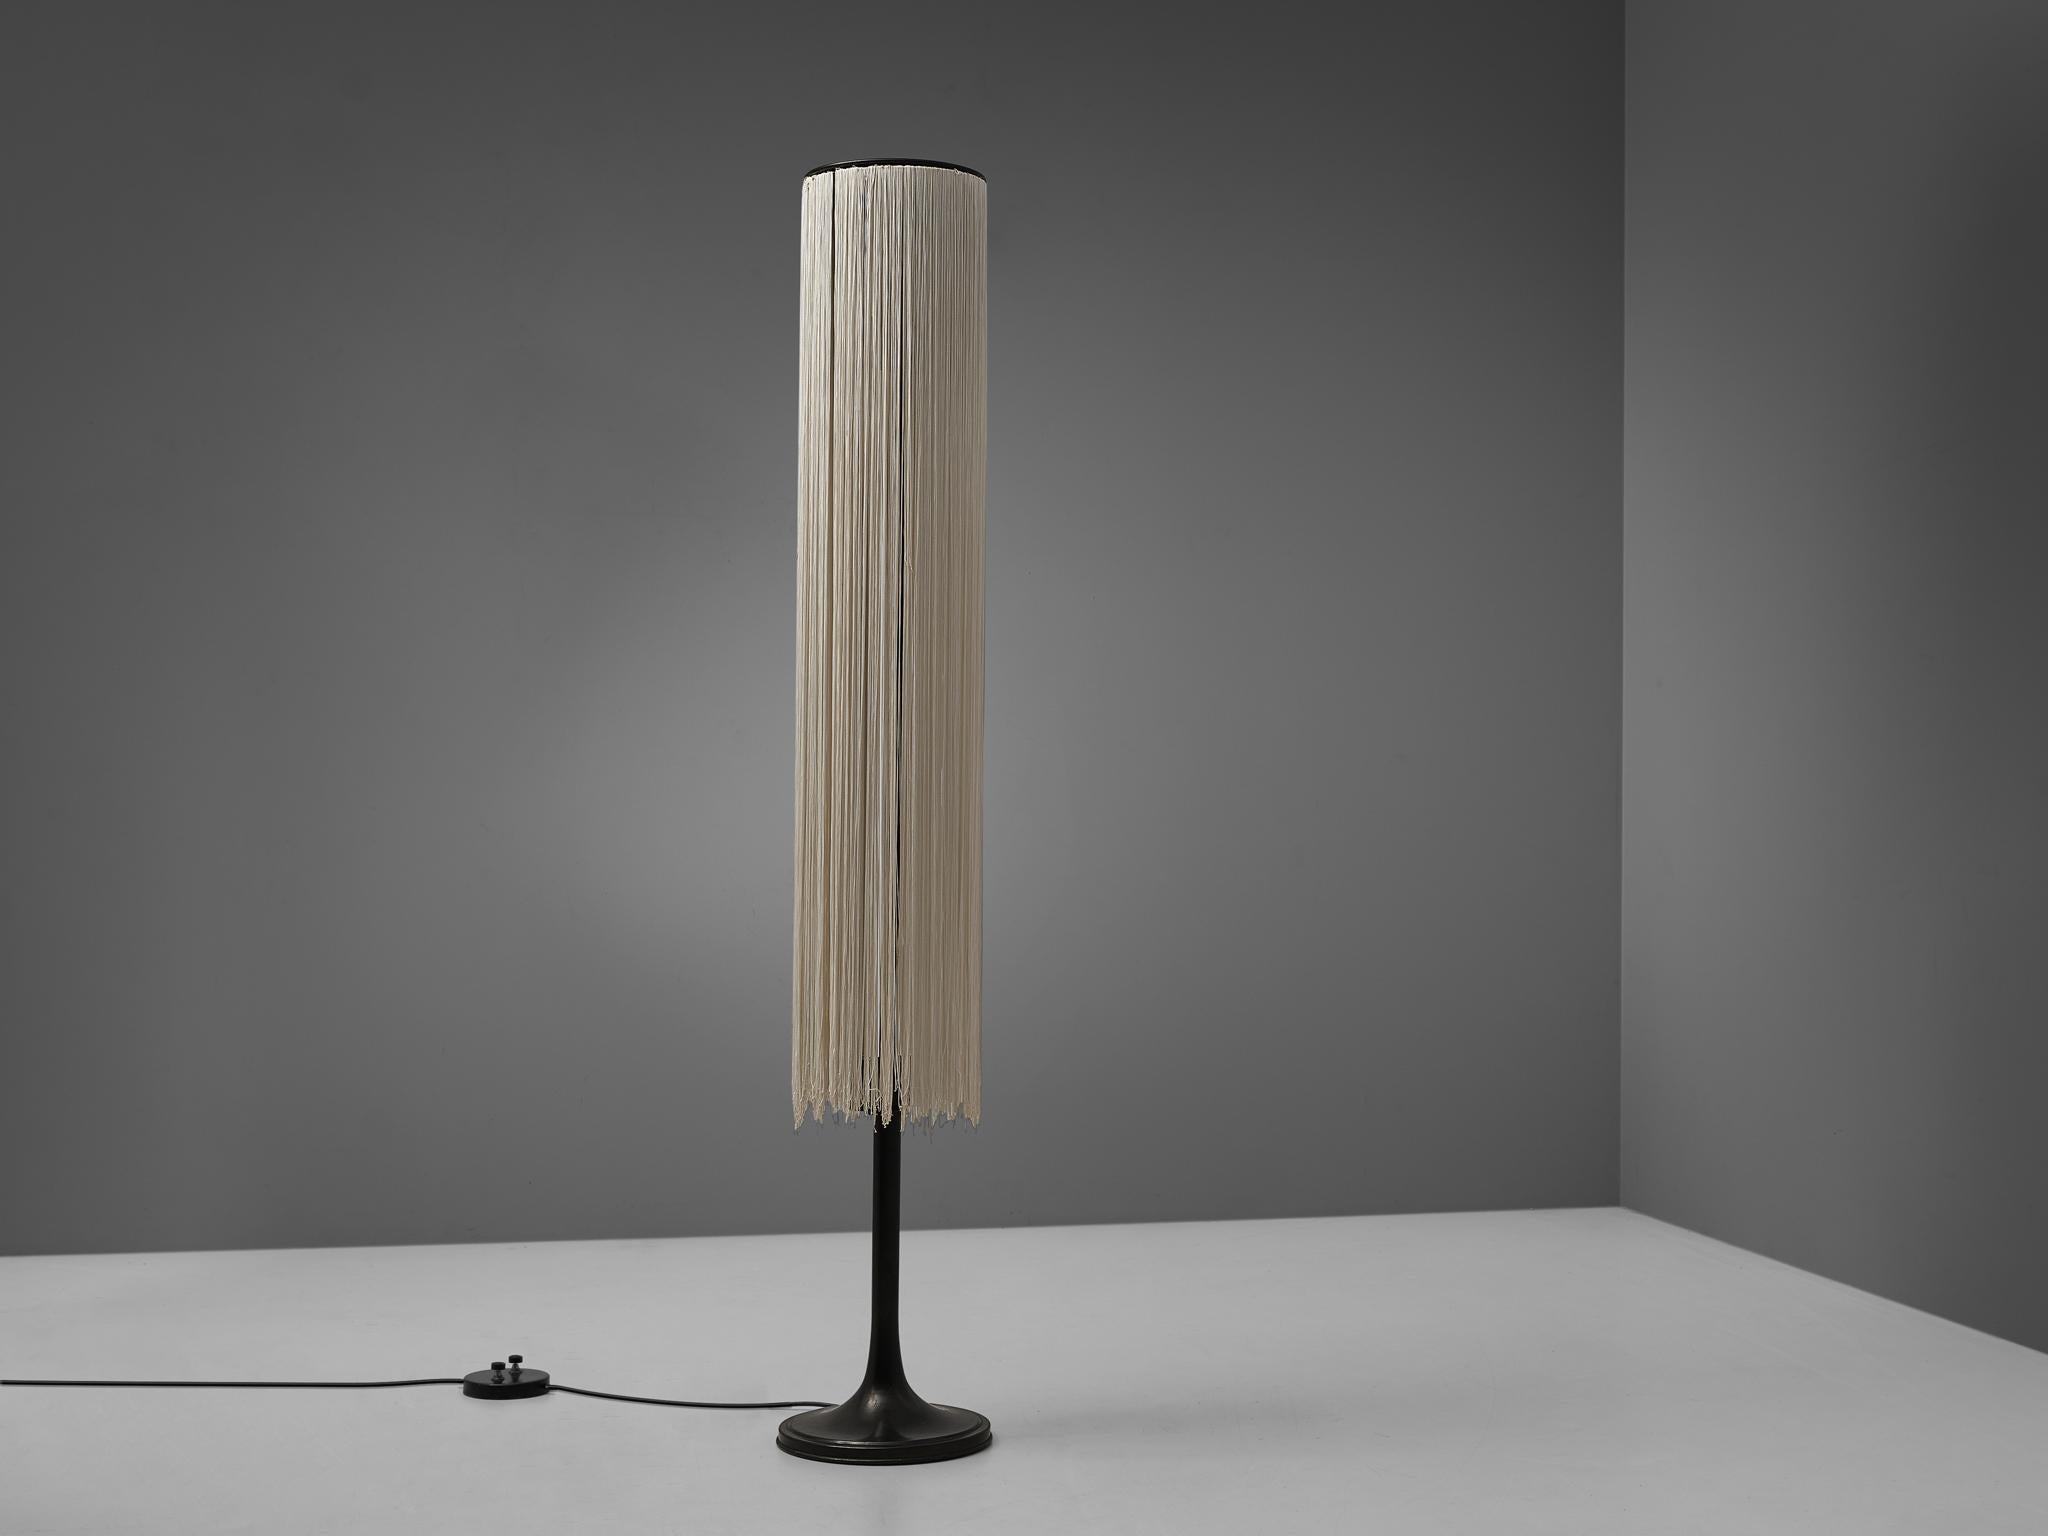 Gino Sarfatti for Arteluce Floor Lamp in Enameled Brass and Rayon 2